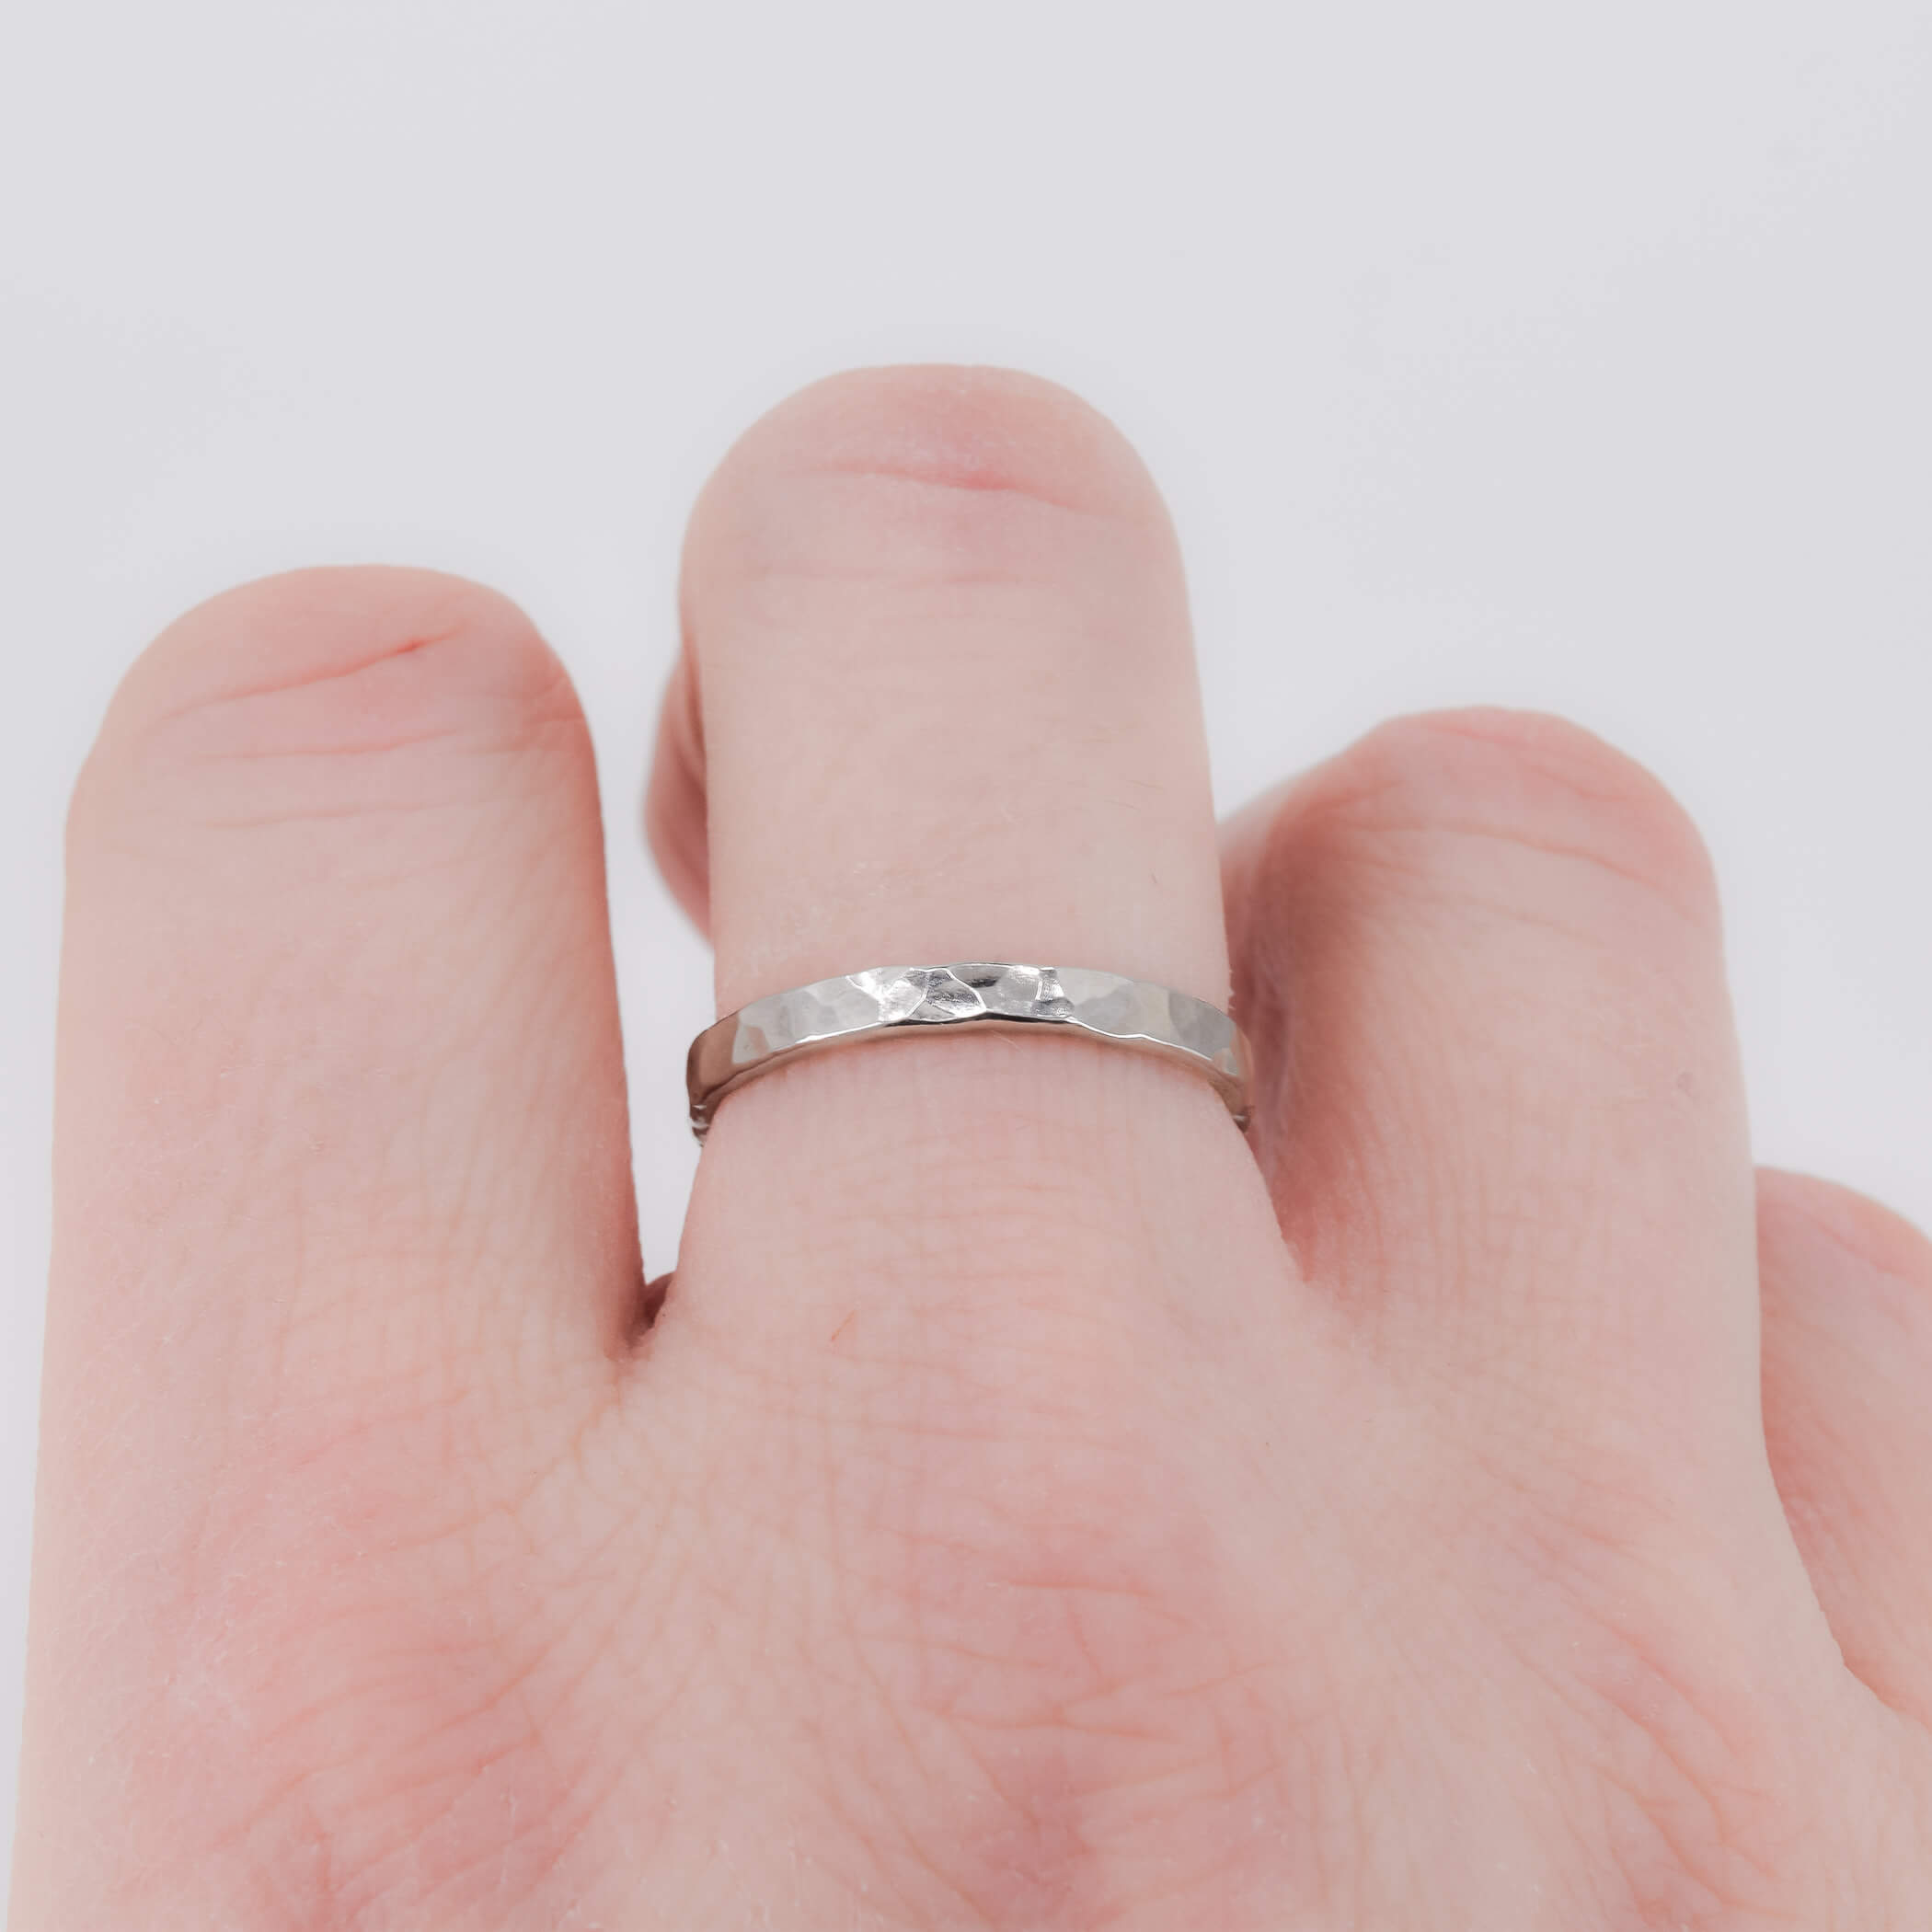 Hammered stacking ring in sterling silver worn on finger